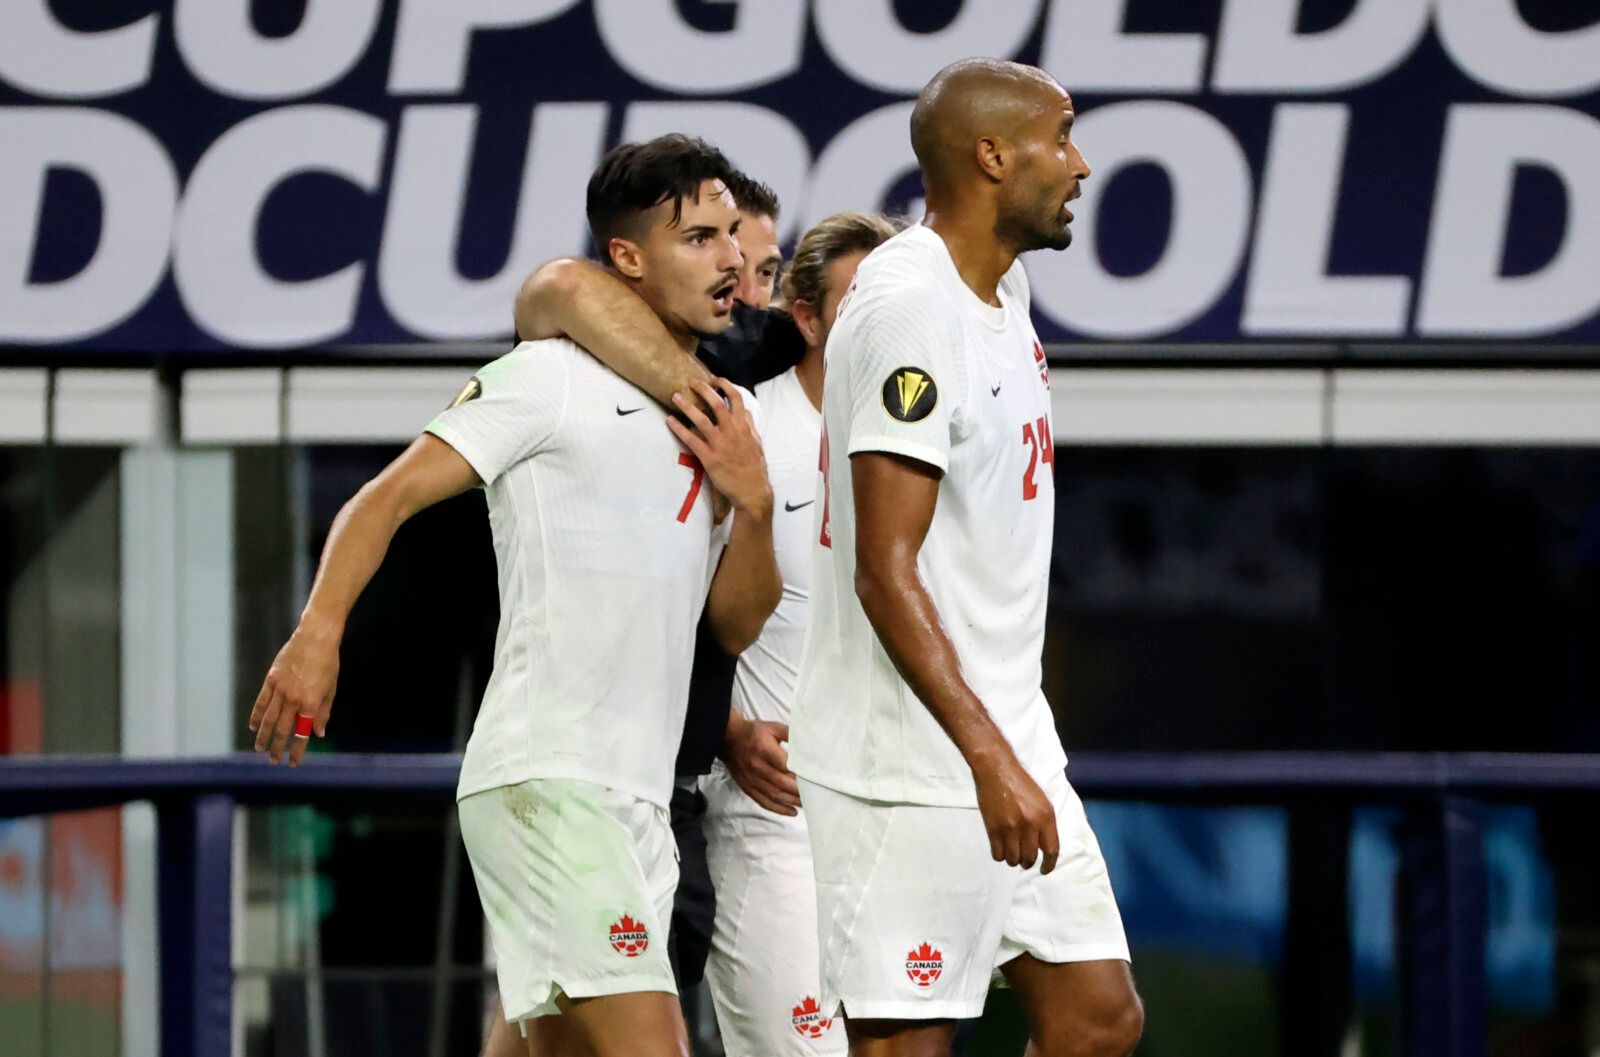 Jul 25, 2021; Arlington, Texas, USA; Canada midfielder Stephen Eustaquio (7) celebrates with teammates after the match against Costa Rica in a CONCACAF Gold Cup quarterfinal soccer match at AT&amp;T Stadium. Mandatory Credit: Kevin Jairaj-USA TODAY Sports